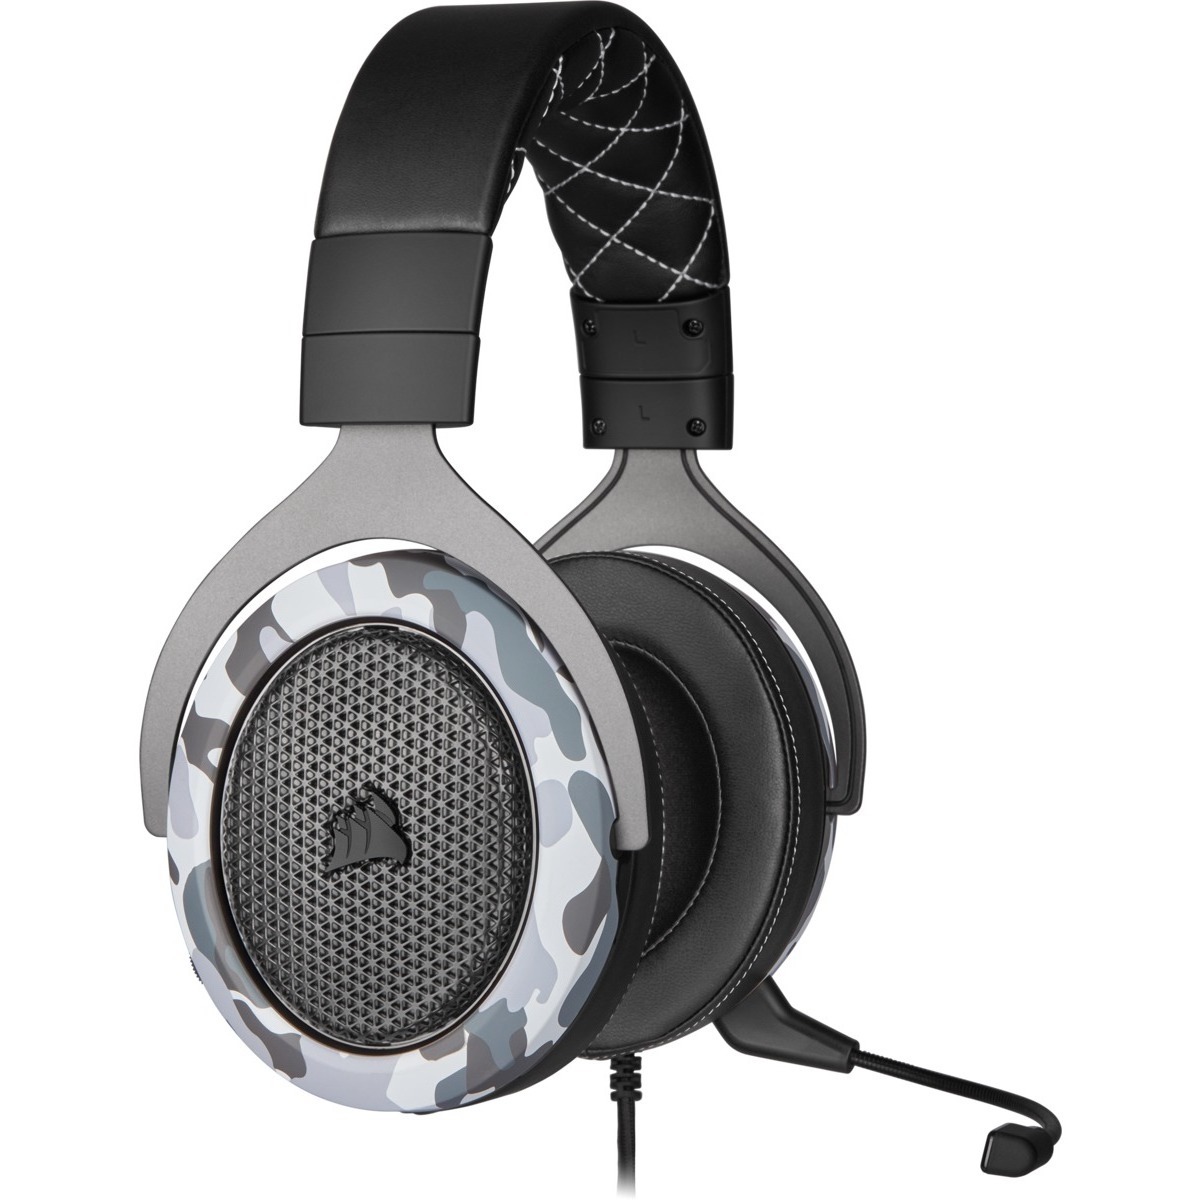 Corsair HS60 HAPTIC Stereo Gaming Headset with Haptic Bass CA-9011225-NA:  Headsets/Earsets